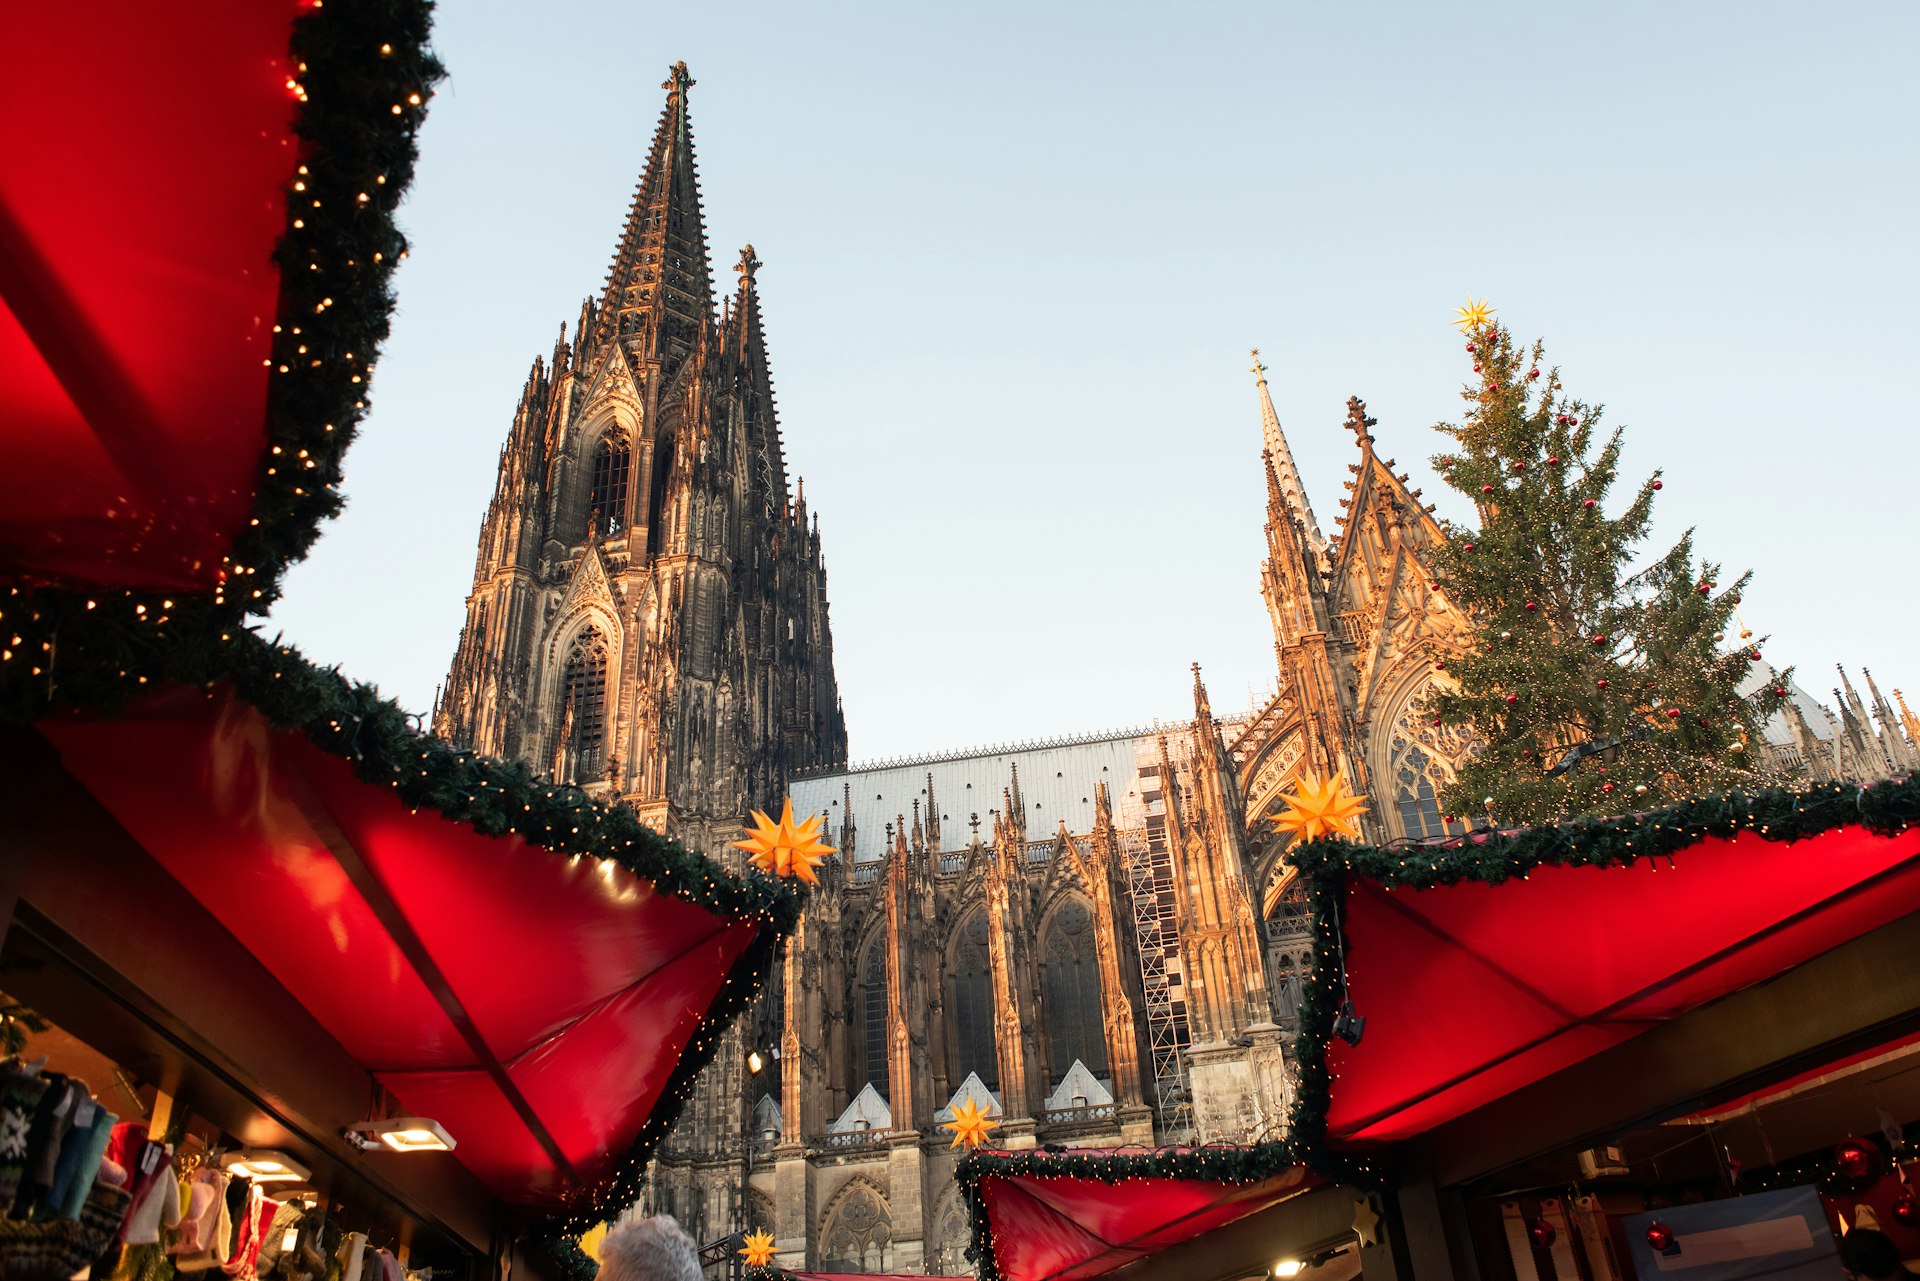 Traditional Christmas market in Europe. Cologne, Germany